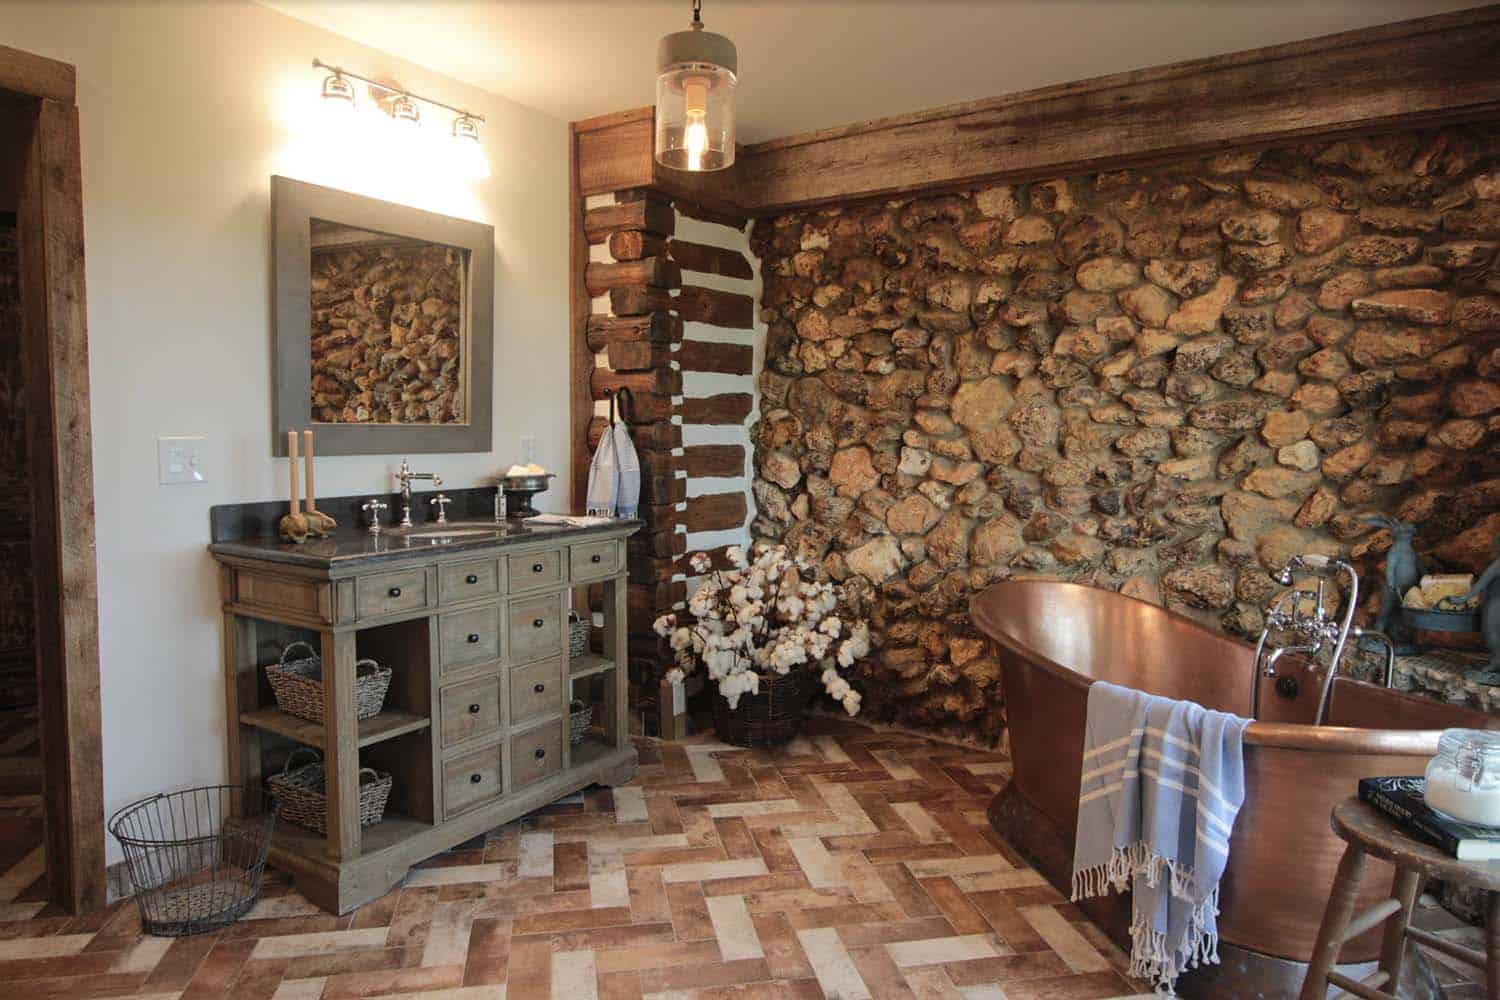 Rustic bathroom with wooden vanity, copper tub and rock wall